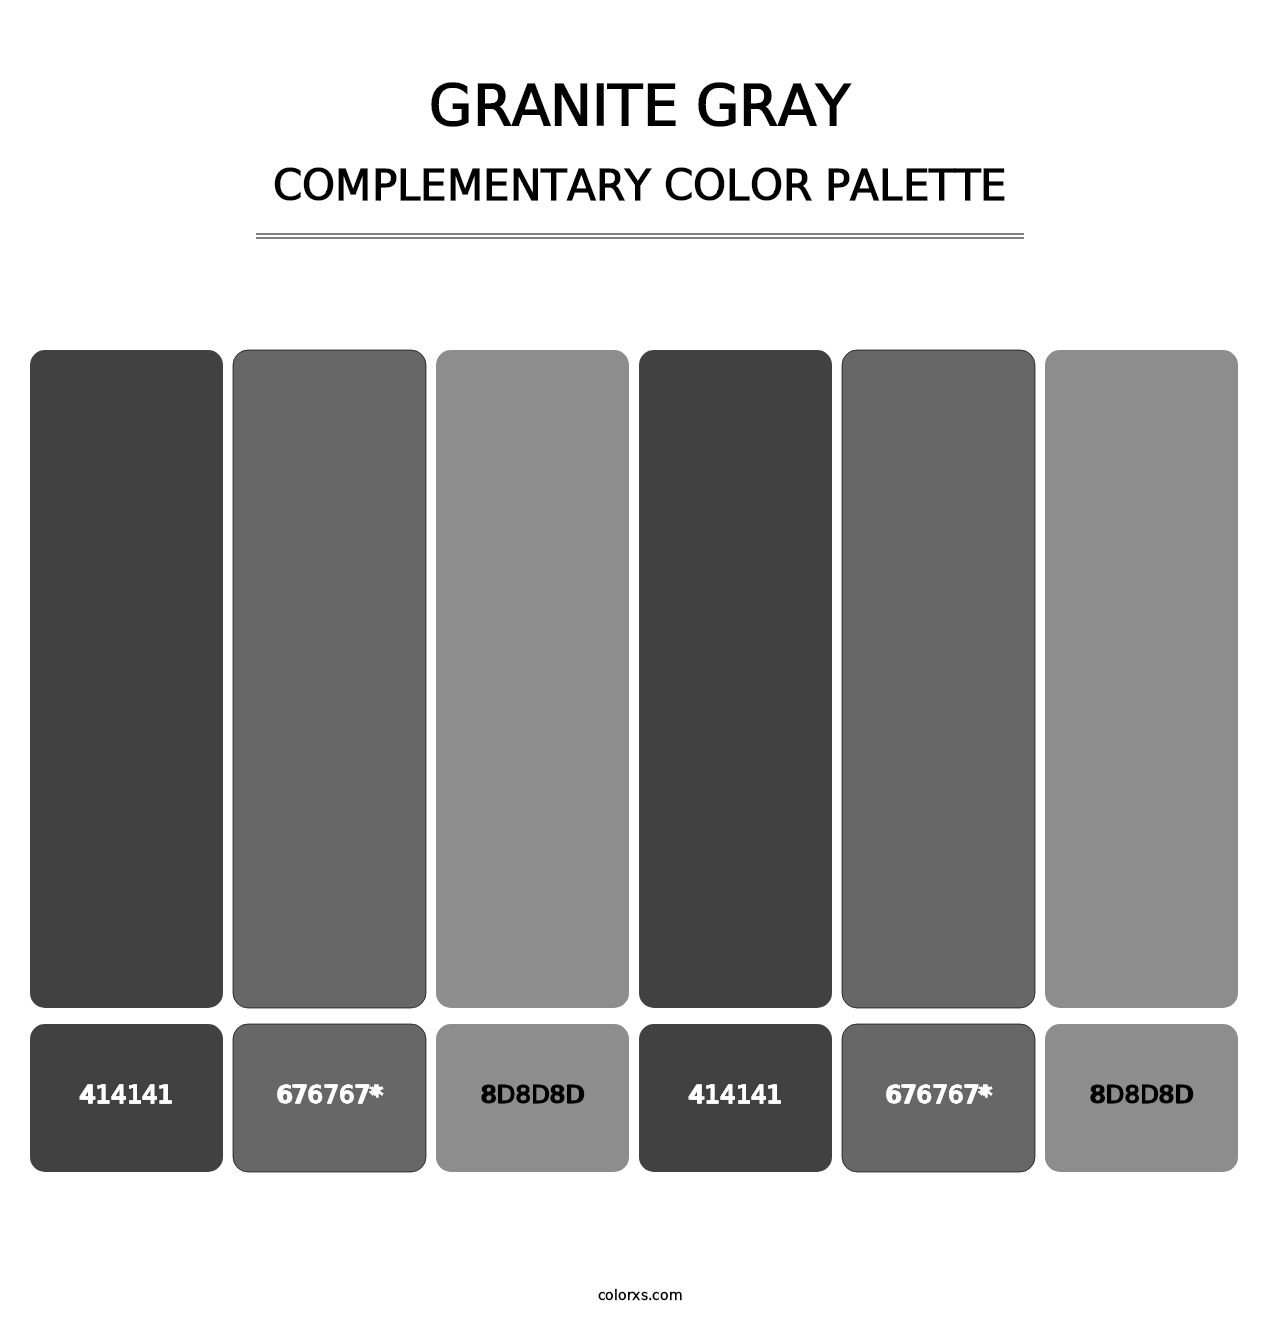 Granite Gray - Complementary Color Palette